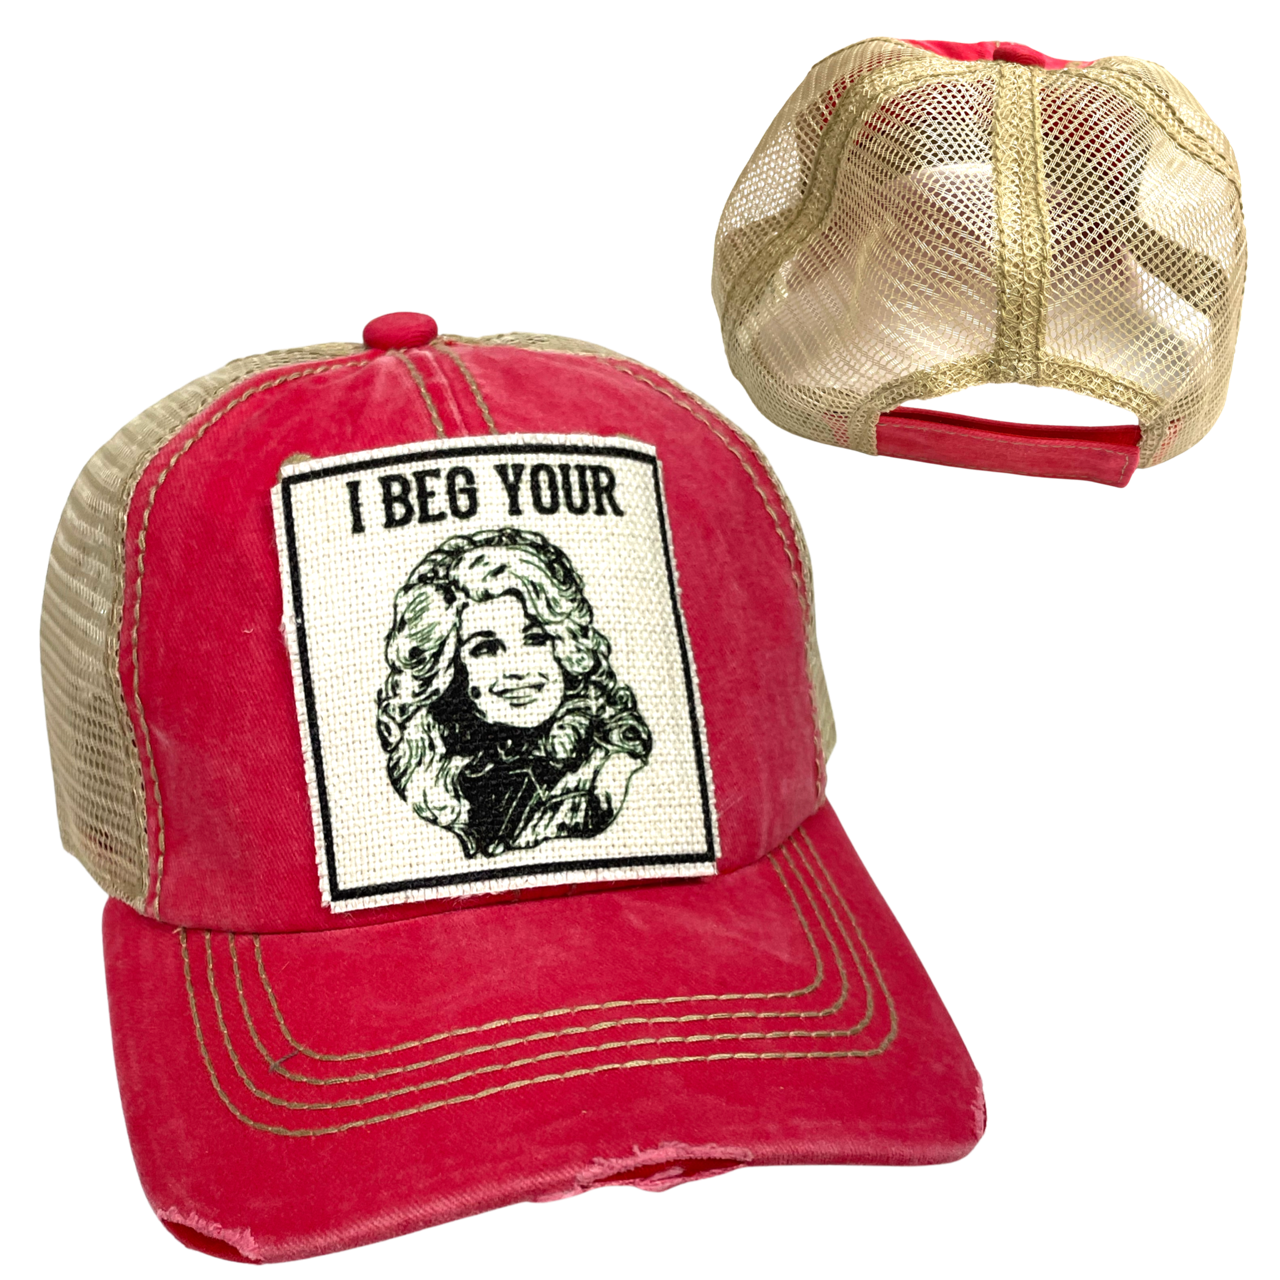 I BEG YOUR PARTON BALL CAP | WOMAN'S HAT | DISTRESSED